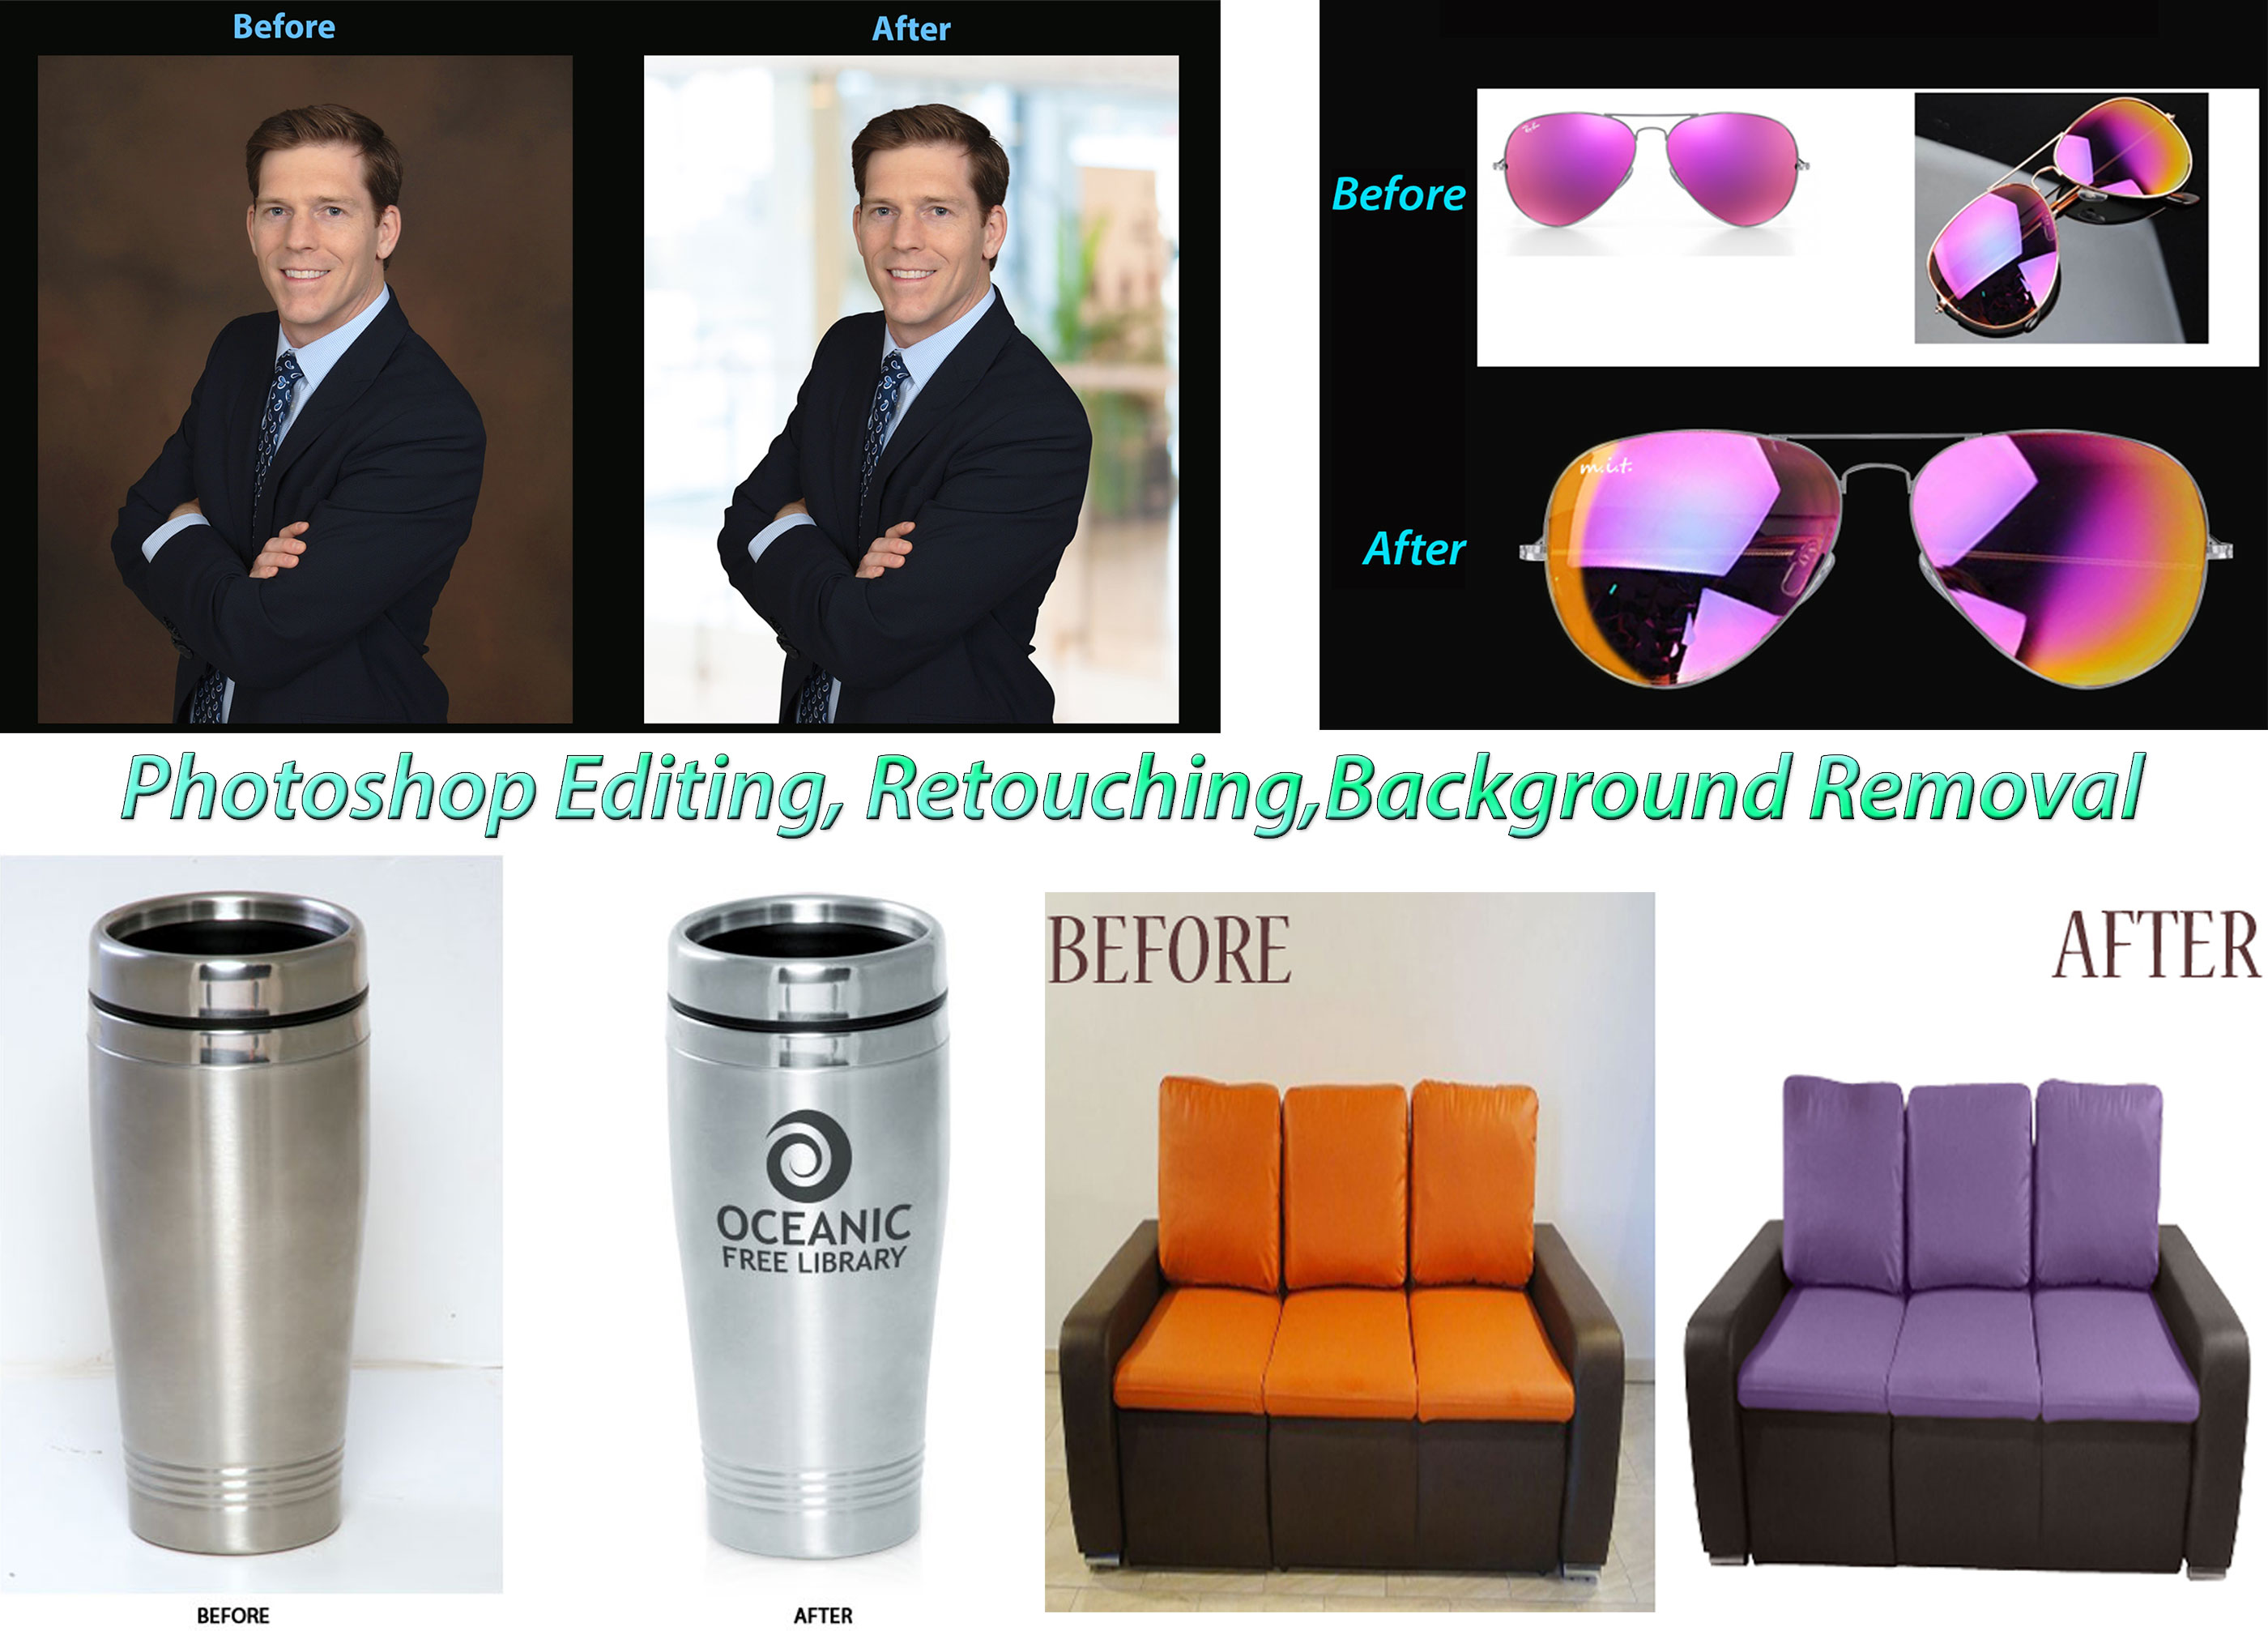 7498I will do photoshop editing retouching background removal